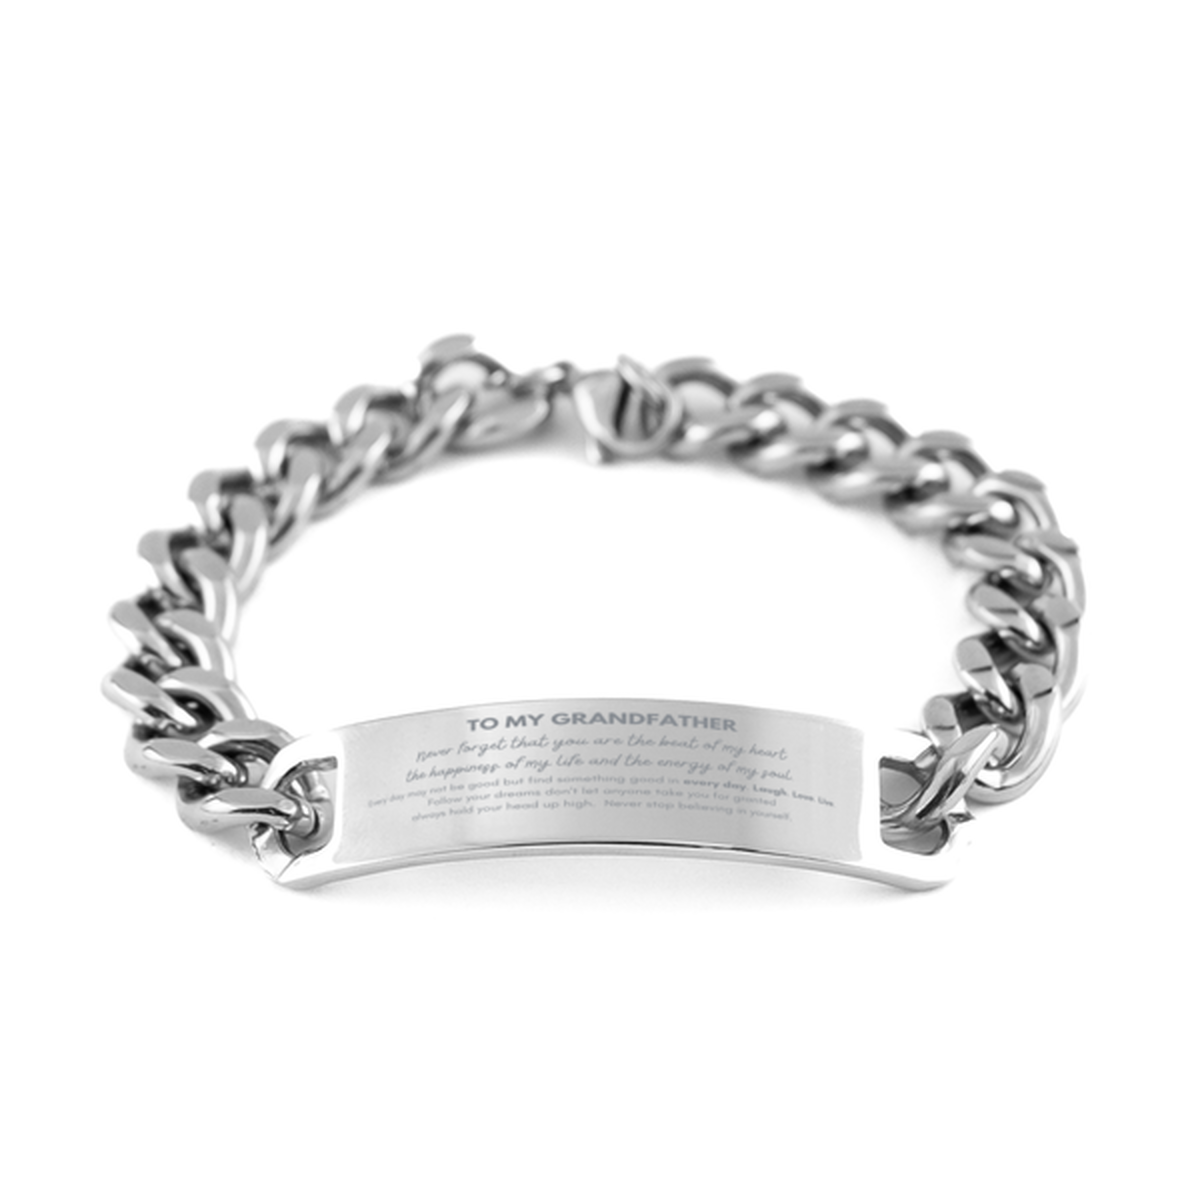 To My Grandfather Bracelet Gifts, Christmas Grandfather Cuban Chain Stainless Steel Bracelet Present, Birthday Unique Motivational For Grandfather, To My Grandfather Never forget that you are the beat of my heart the happiness of my life and the energy of